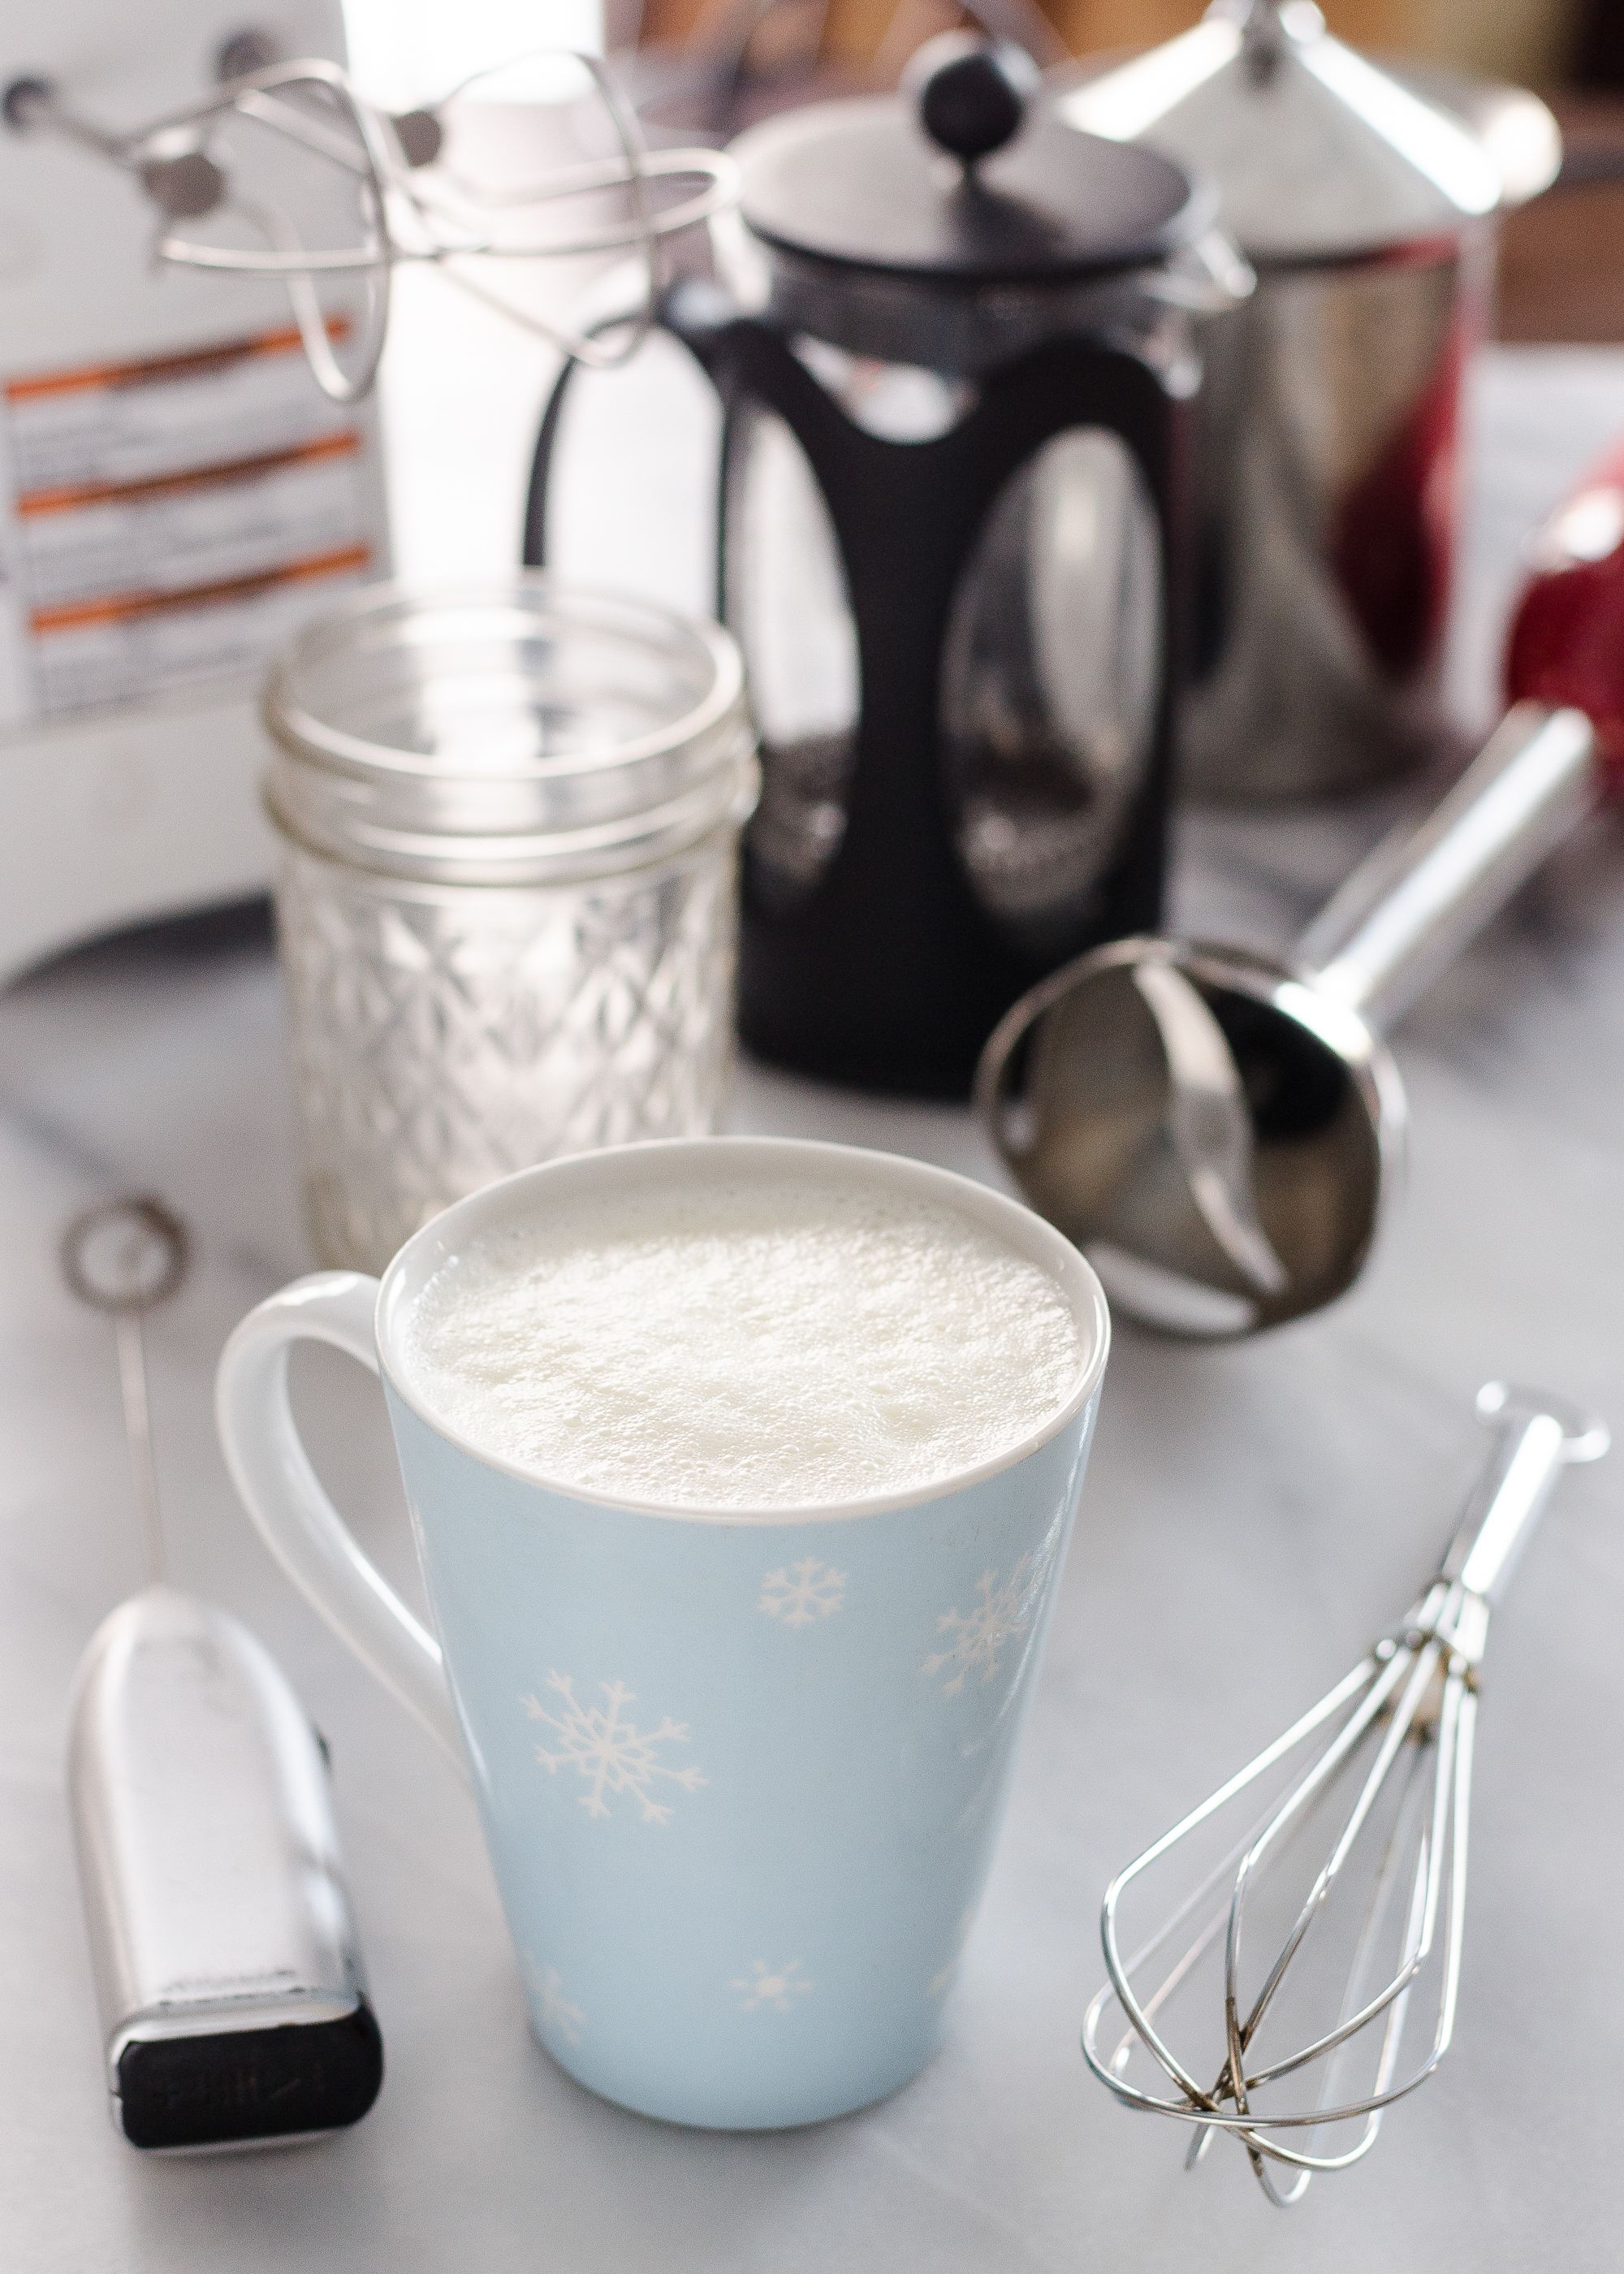 https://hips.hearstapps.com/thepioneerwoman/wp-content/uploads/2017/01/how-to-froth-milk-without-an-espresso-machine-17.jpg